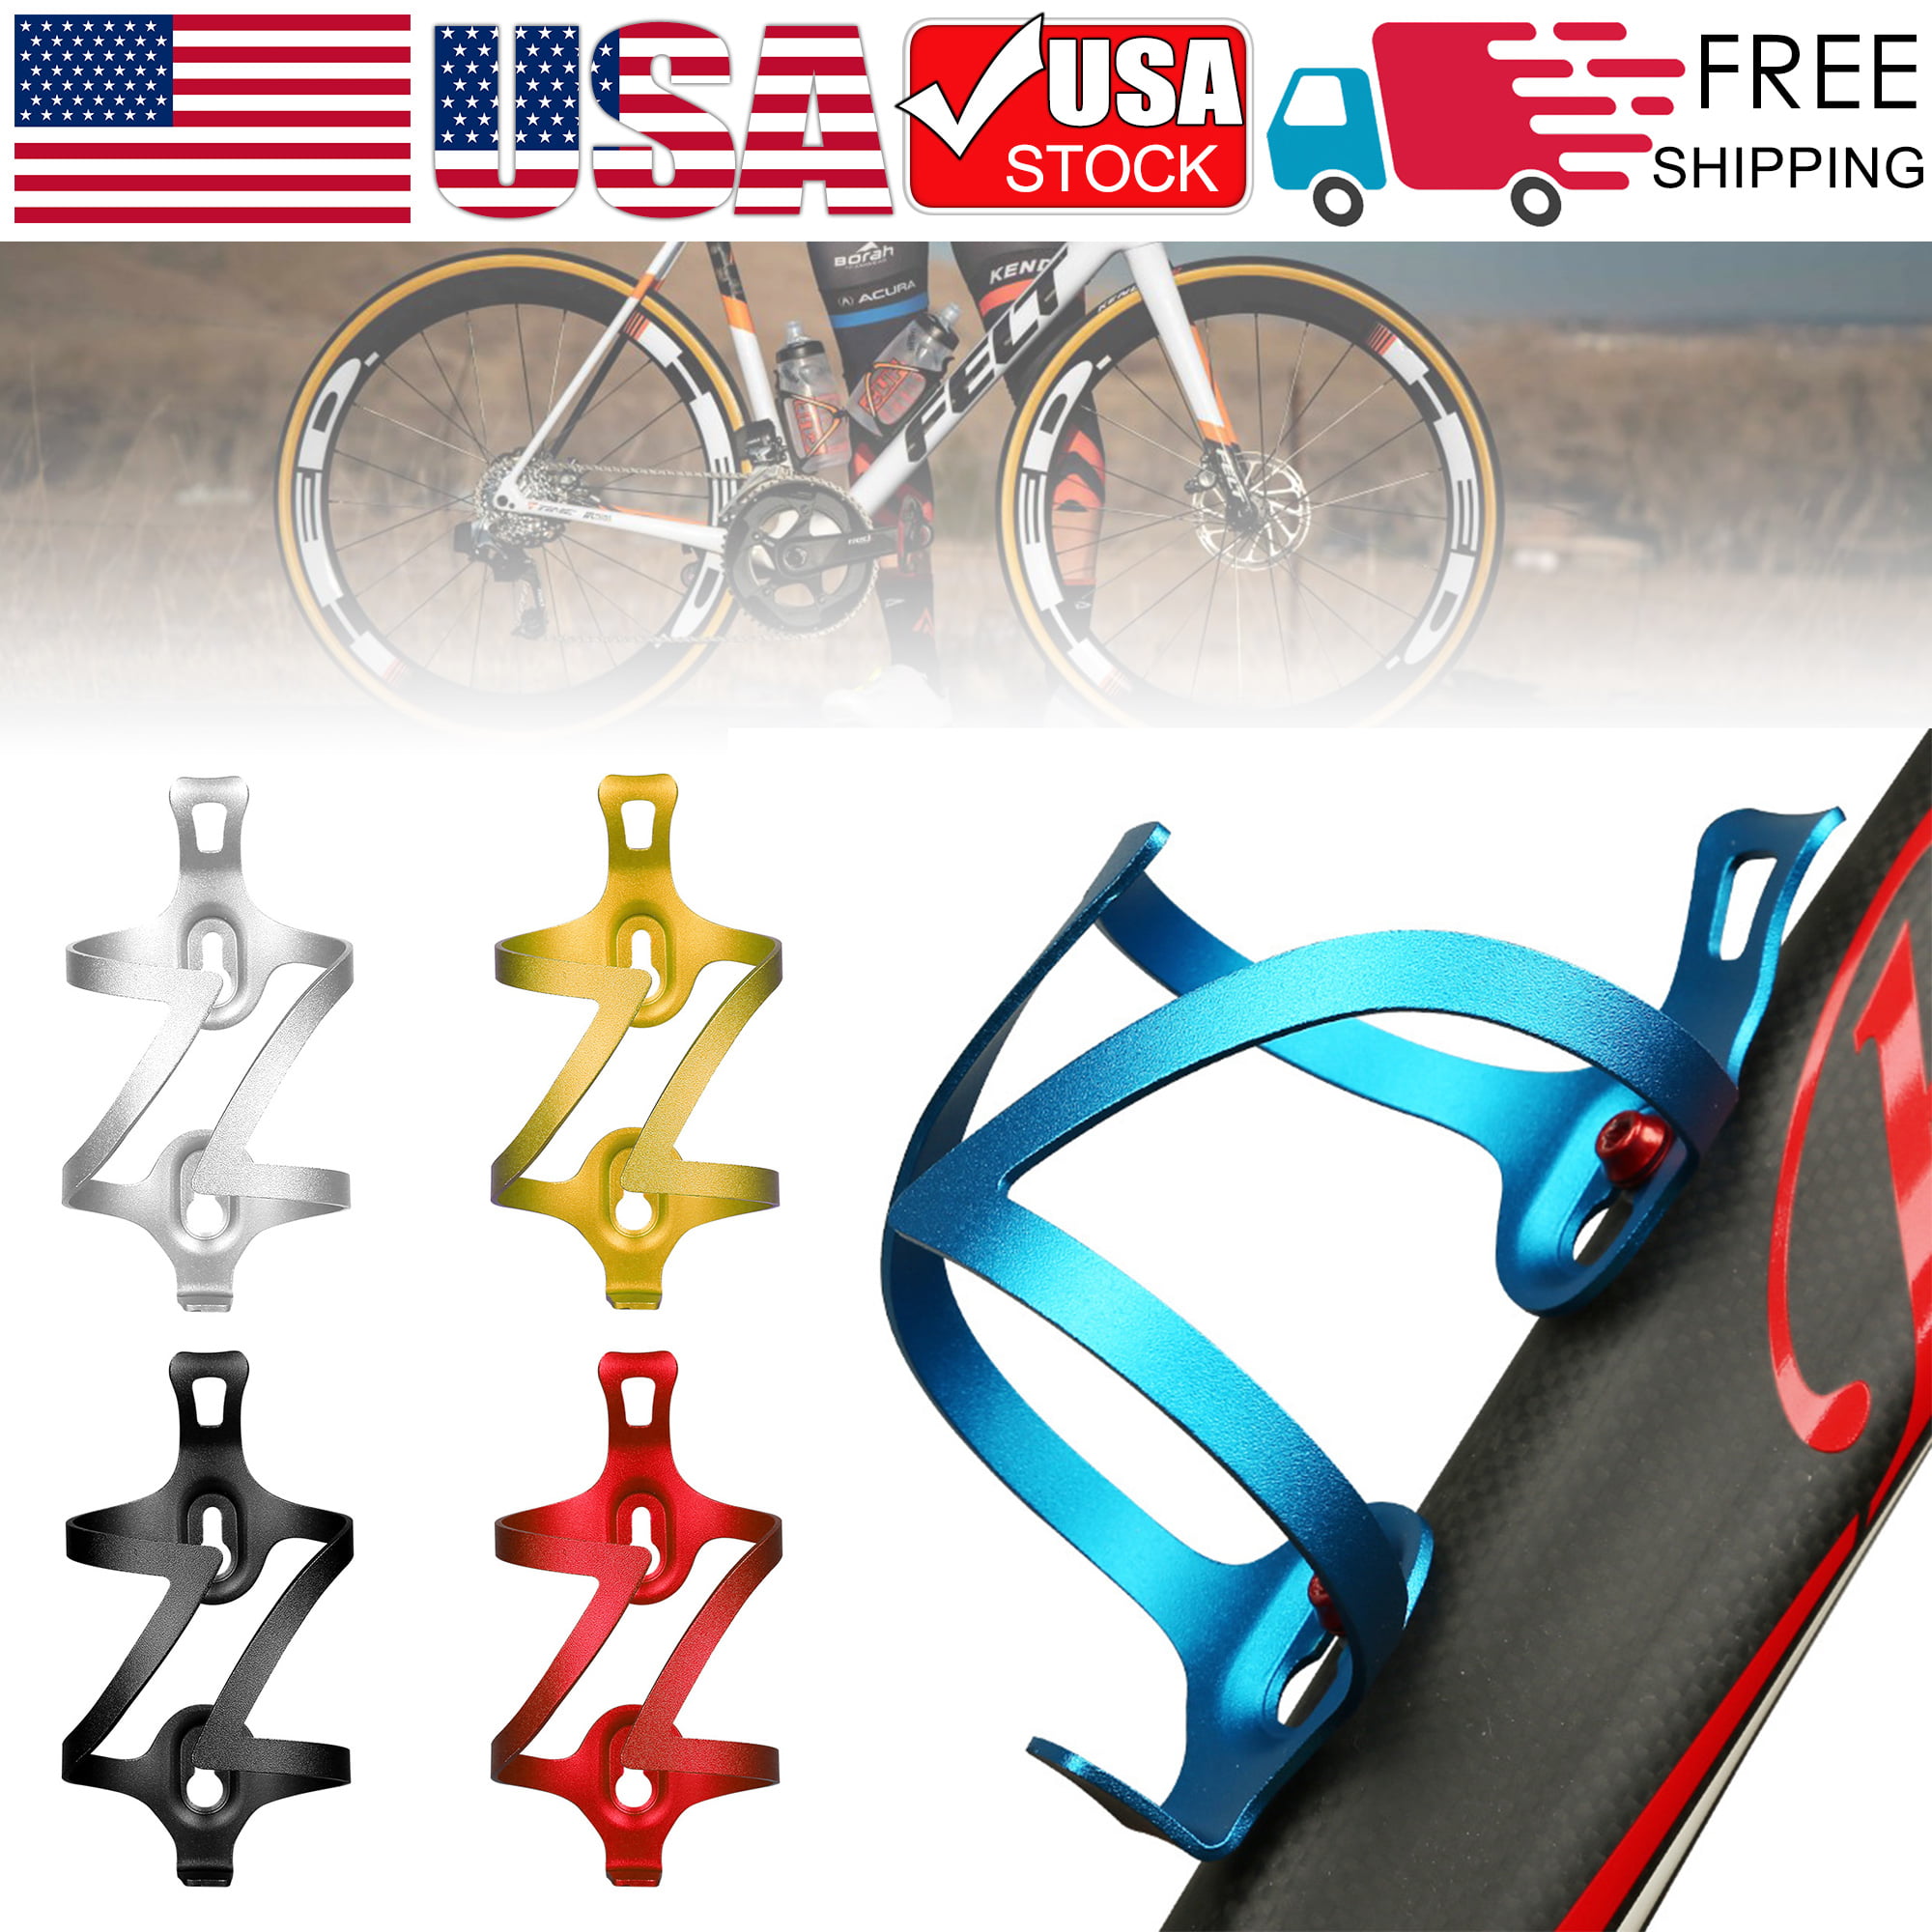 2x Bike Water Bottle Cage Cycling Drink Cup Holder For MTB Bicycle Rack Bracket